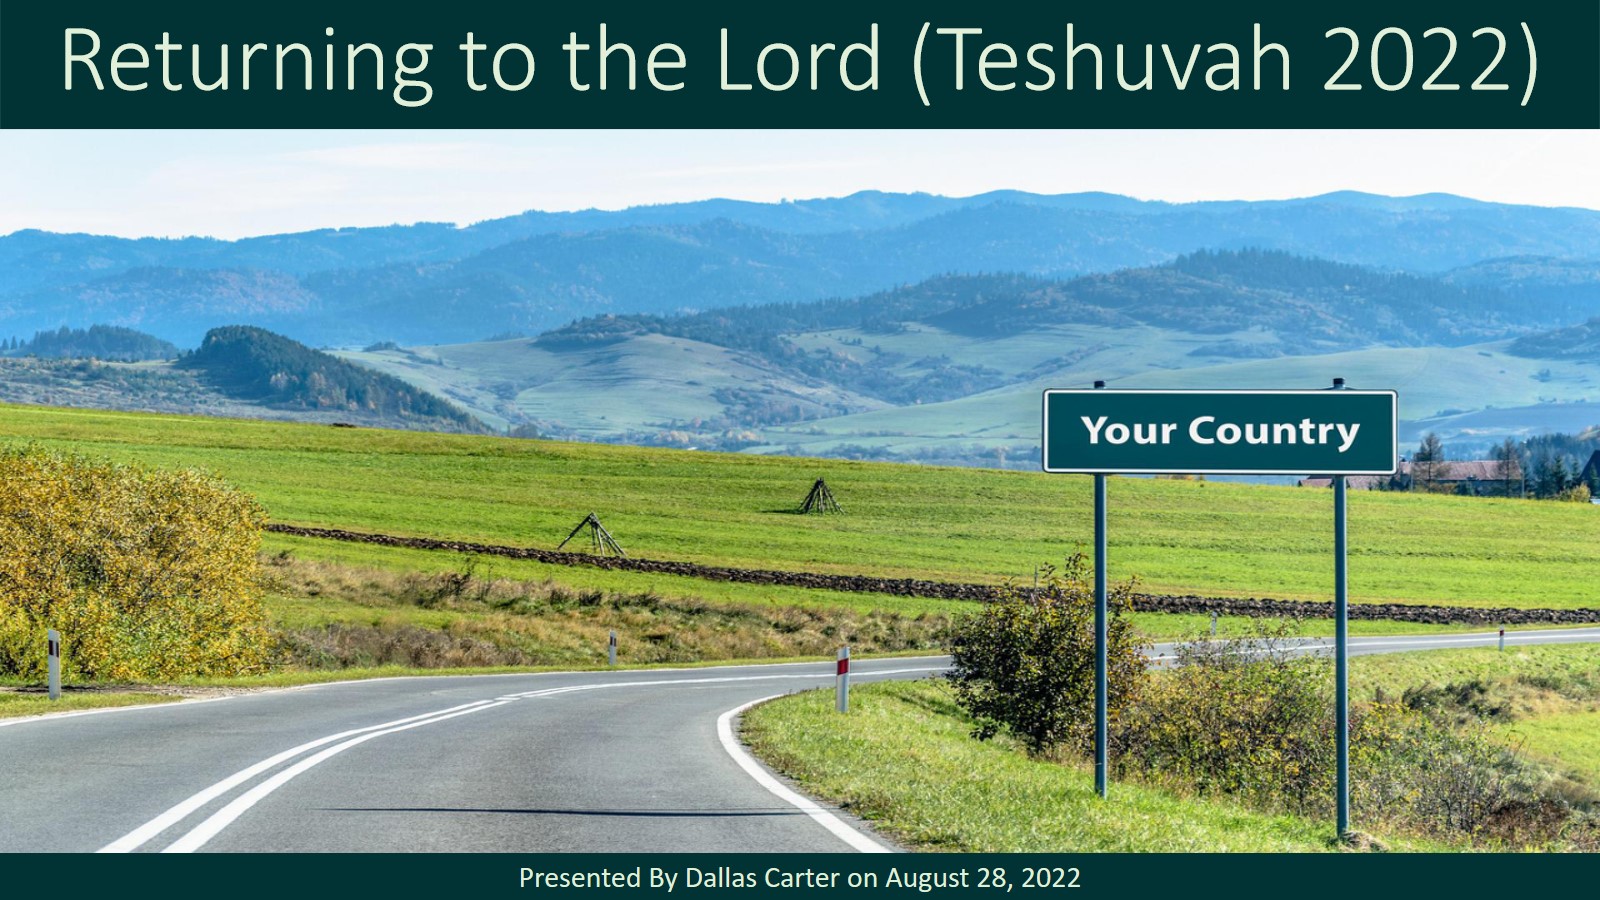 Returning to the Lord (Teshuvah 2022)